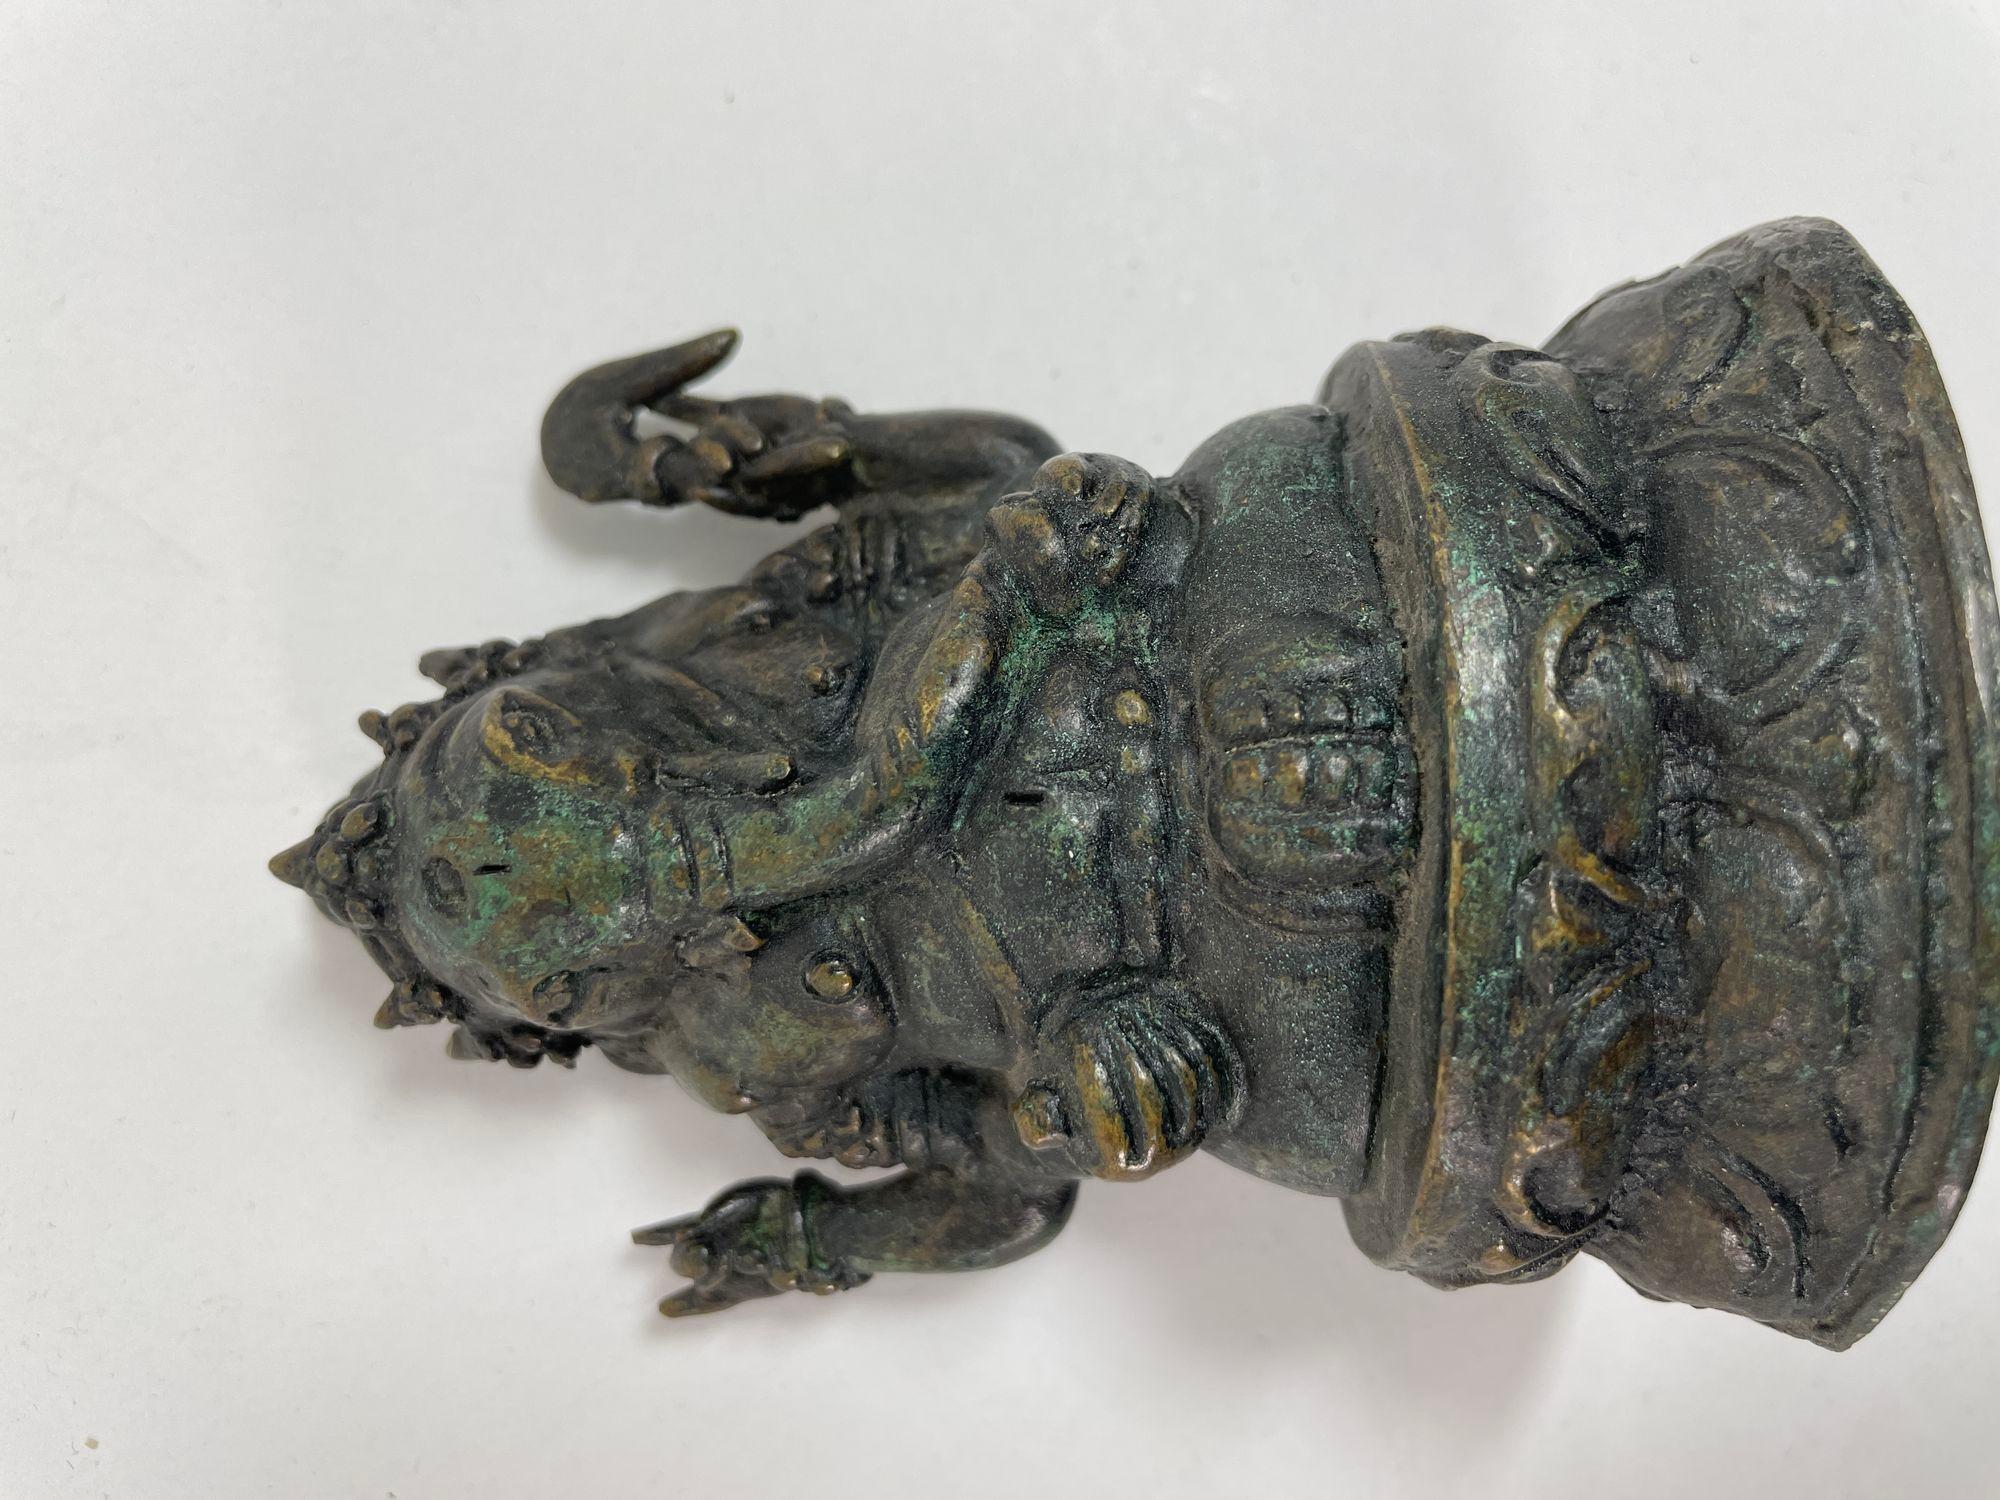 Indian or Nepalese Ganesh Ganesha Bronze Statue Sculpture.
Beautiful bronze sculpture of Ganesh with a nice aged patina.
From a collection of Asian and Tibetan Indian works.
Would be a great addition to any South-East Asian or Indian/ Nepalese